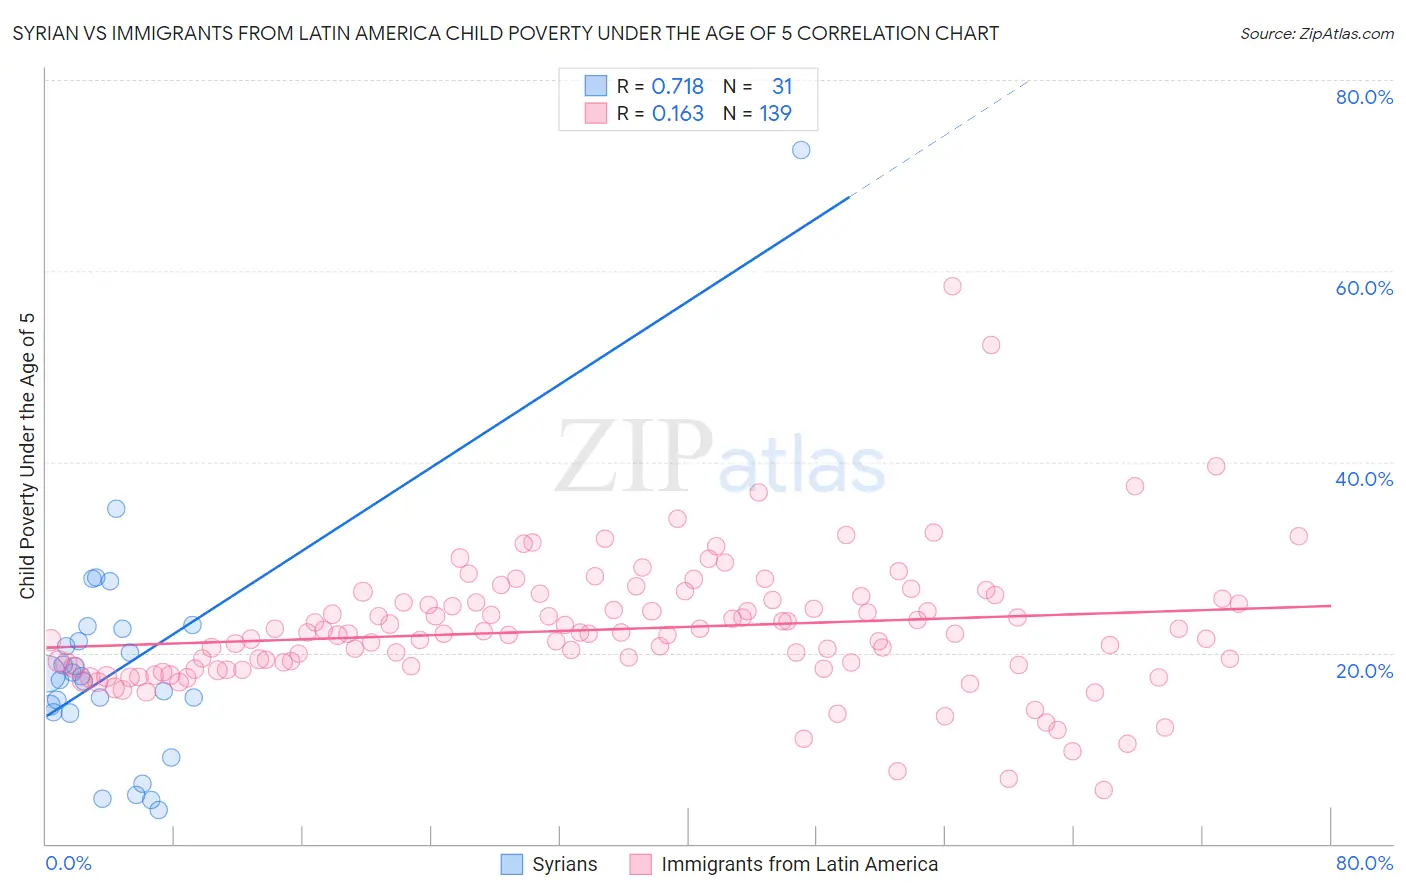 Syrian vs Immigrants from Latin America Child Poverty Under the Age of 5